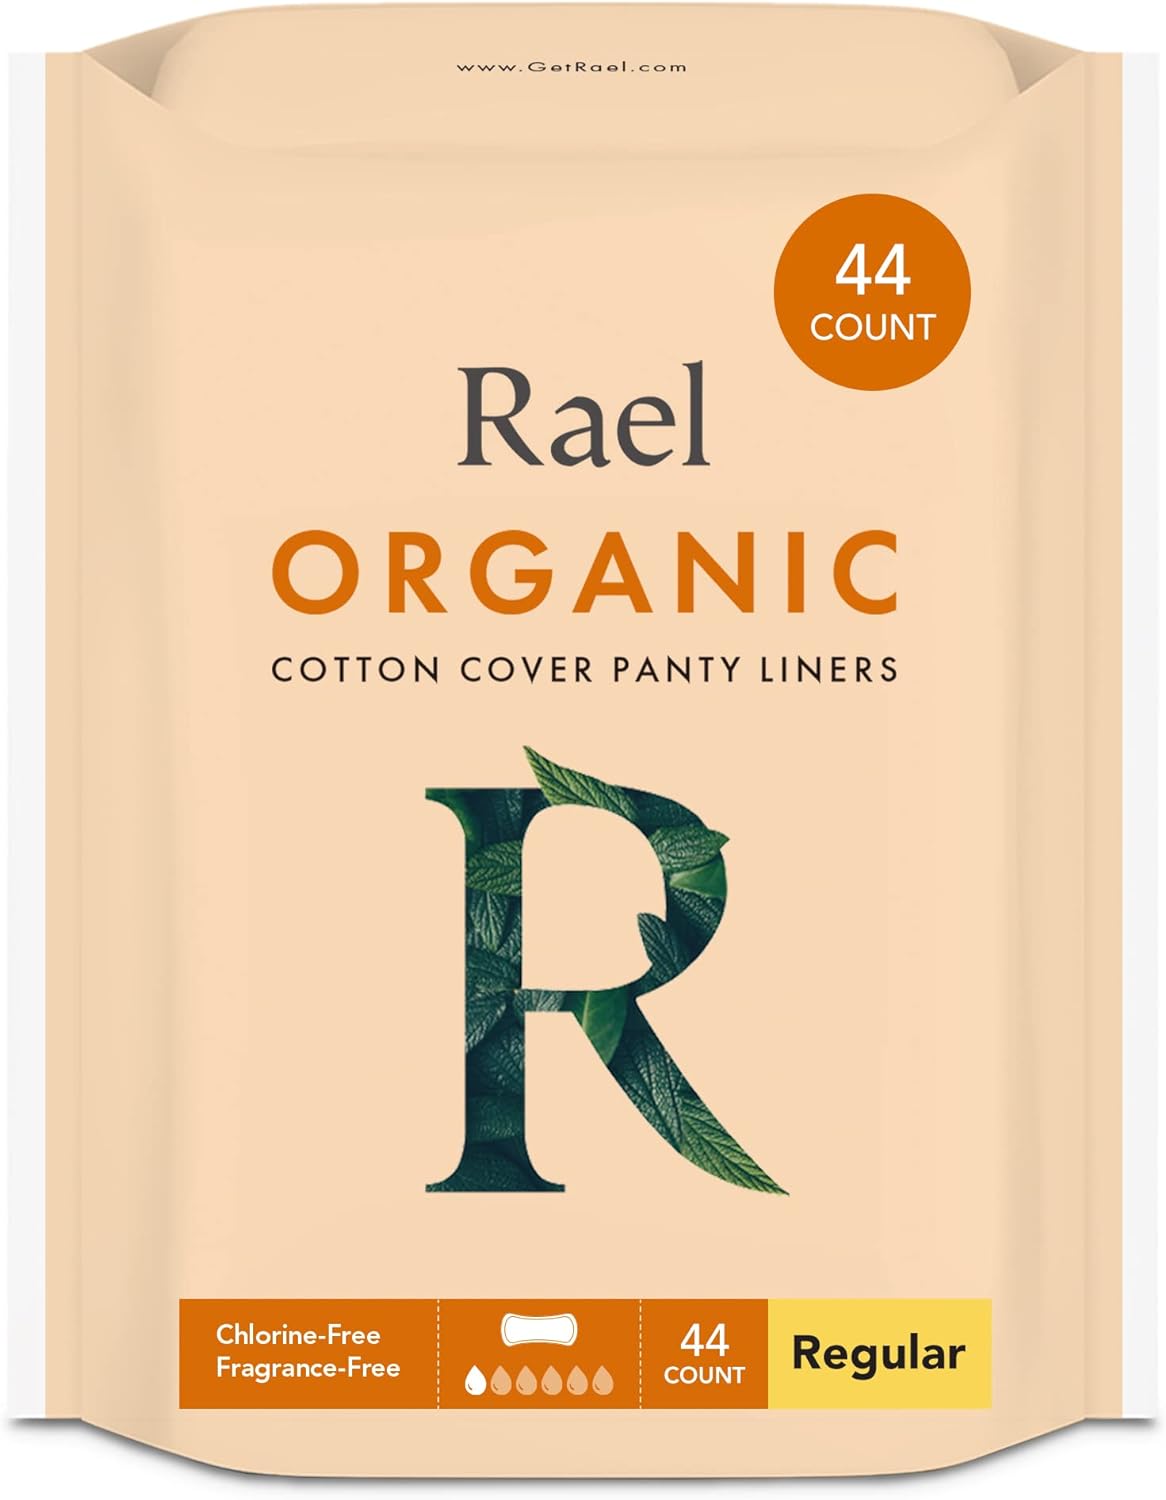 Rael Panty Liners for Women, Organic Cotton Cover - Regular Pantiliners, Light Absorbency, Unscented, Chlorine Free (Regular, 44 Count)